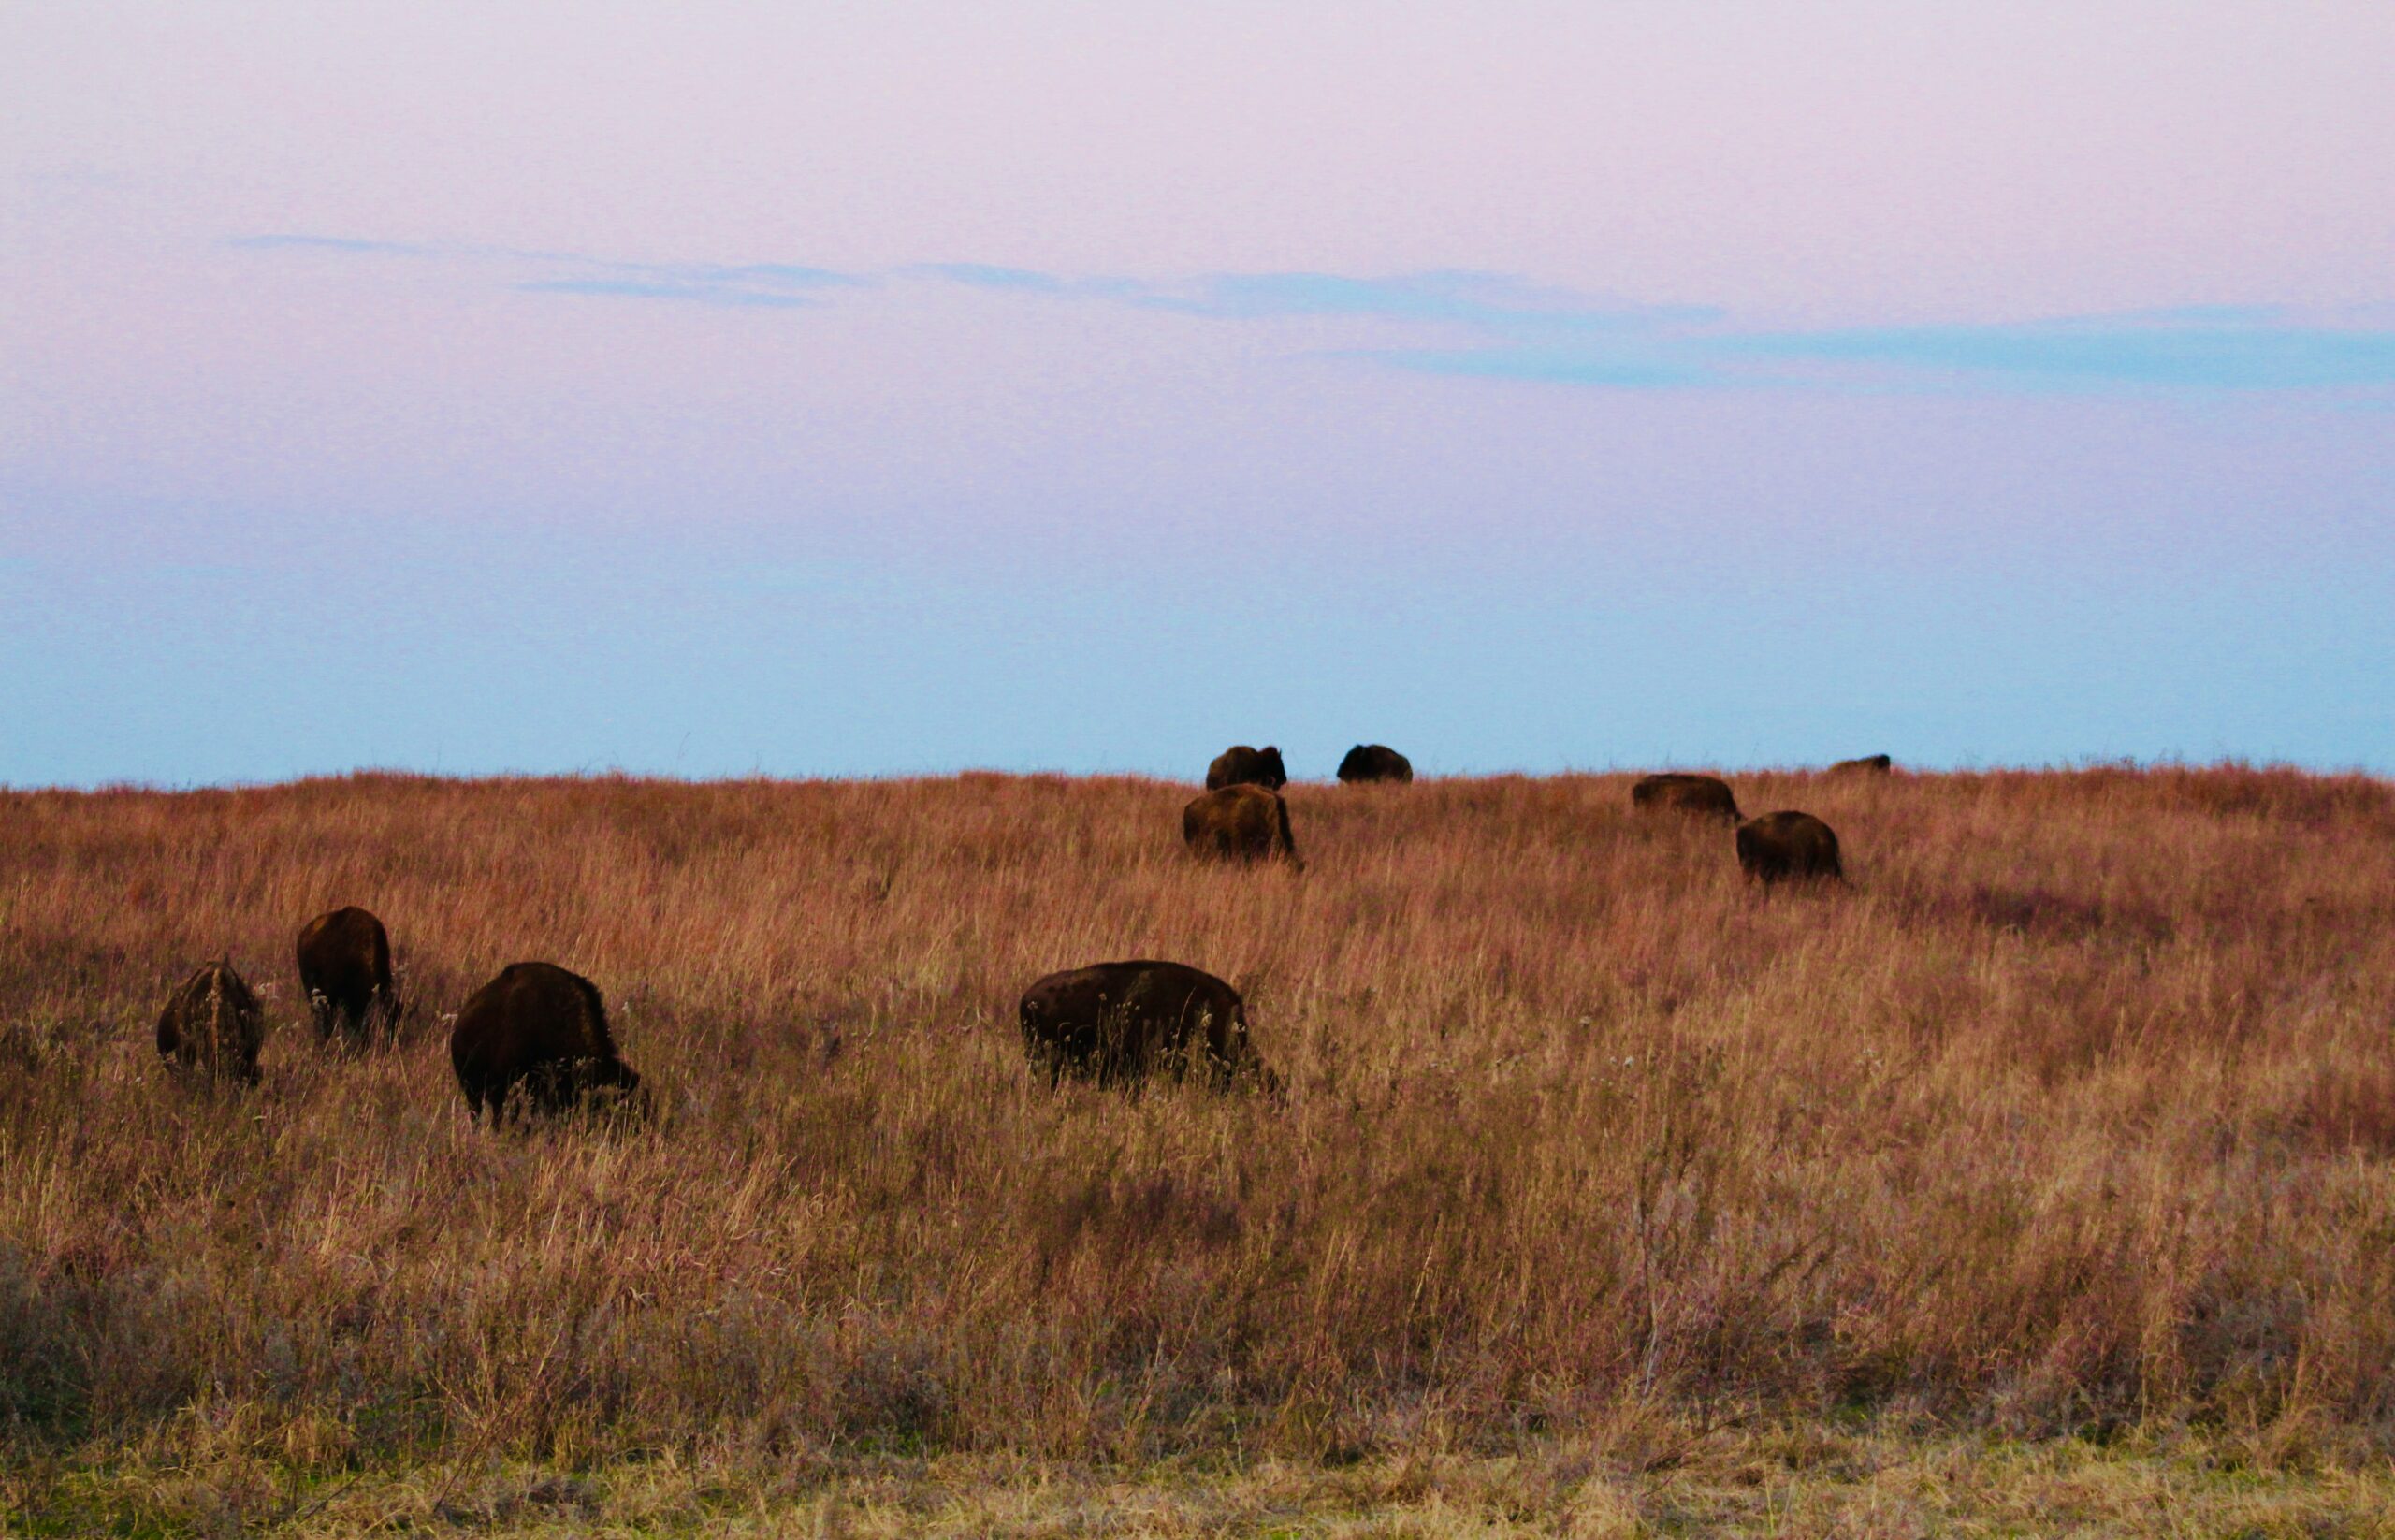 Pawhuska, Oklahoma is a rural destination that helped create Fairfax in a movie. 
pictured: bison grazing in a Pawhuska pasture